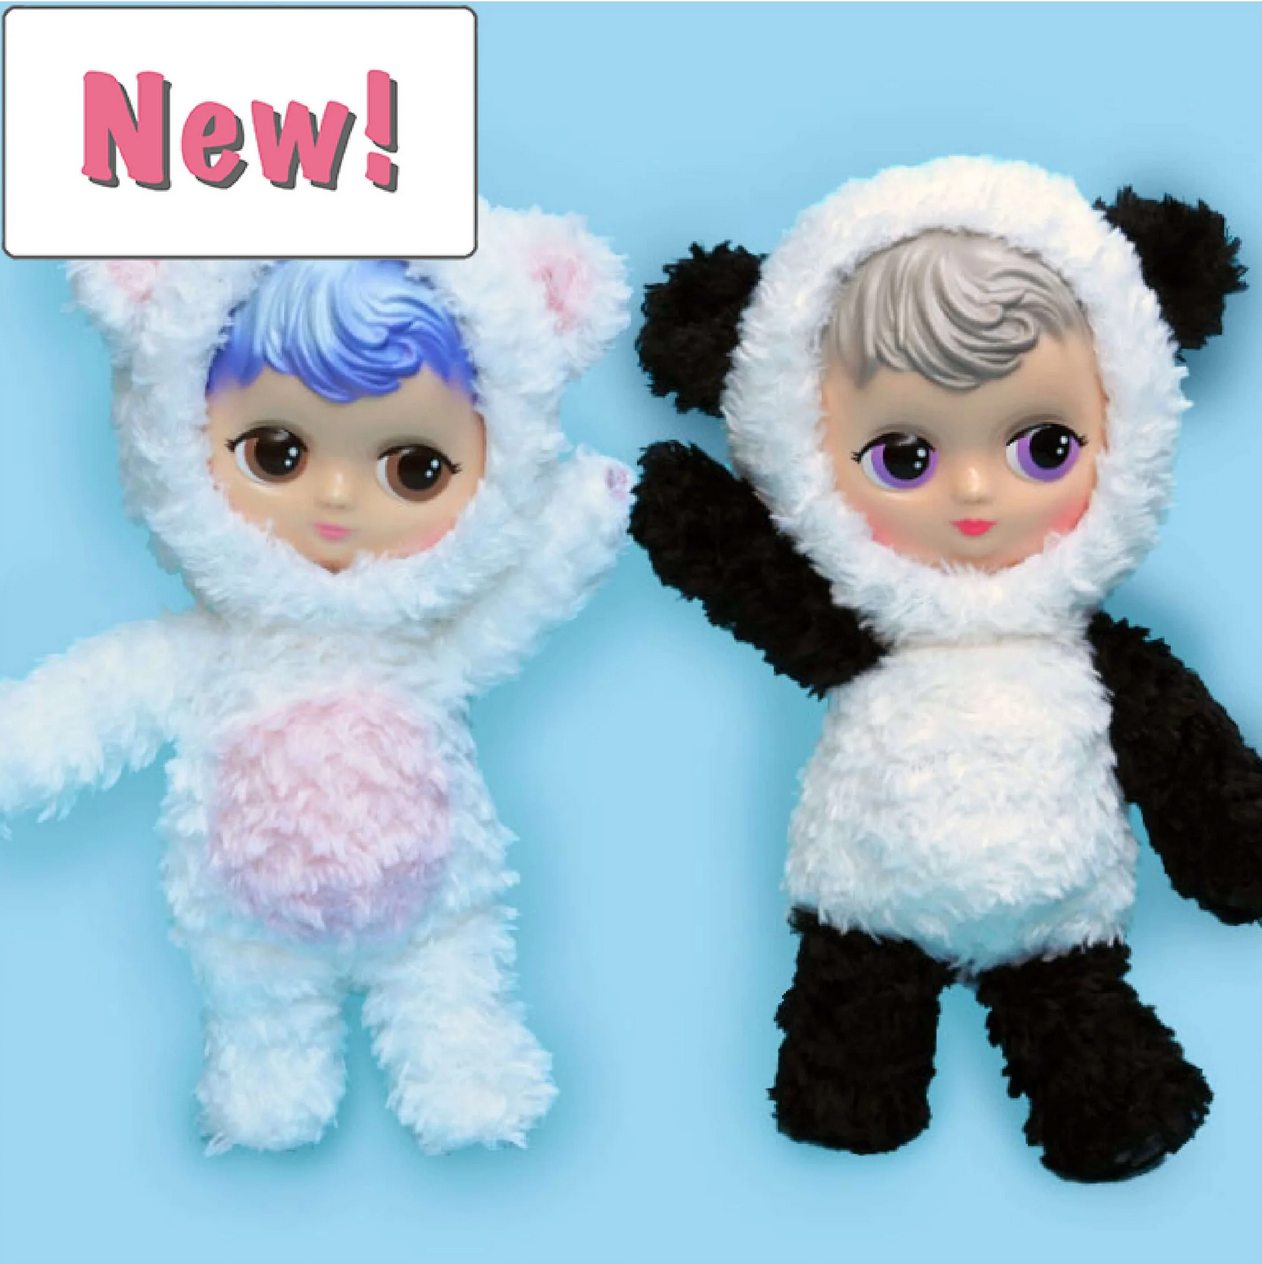 Snowy and Luv Luv join the “Luv Hug Blythe” family!!